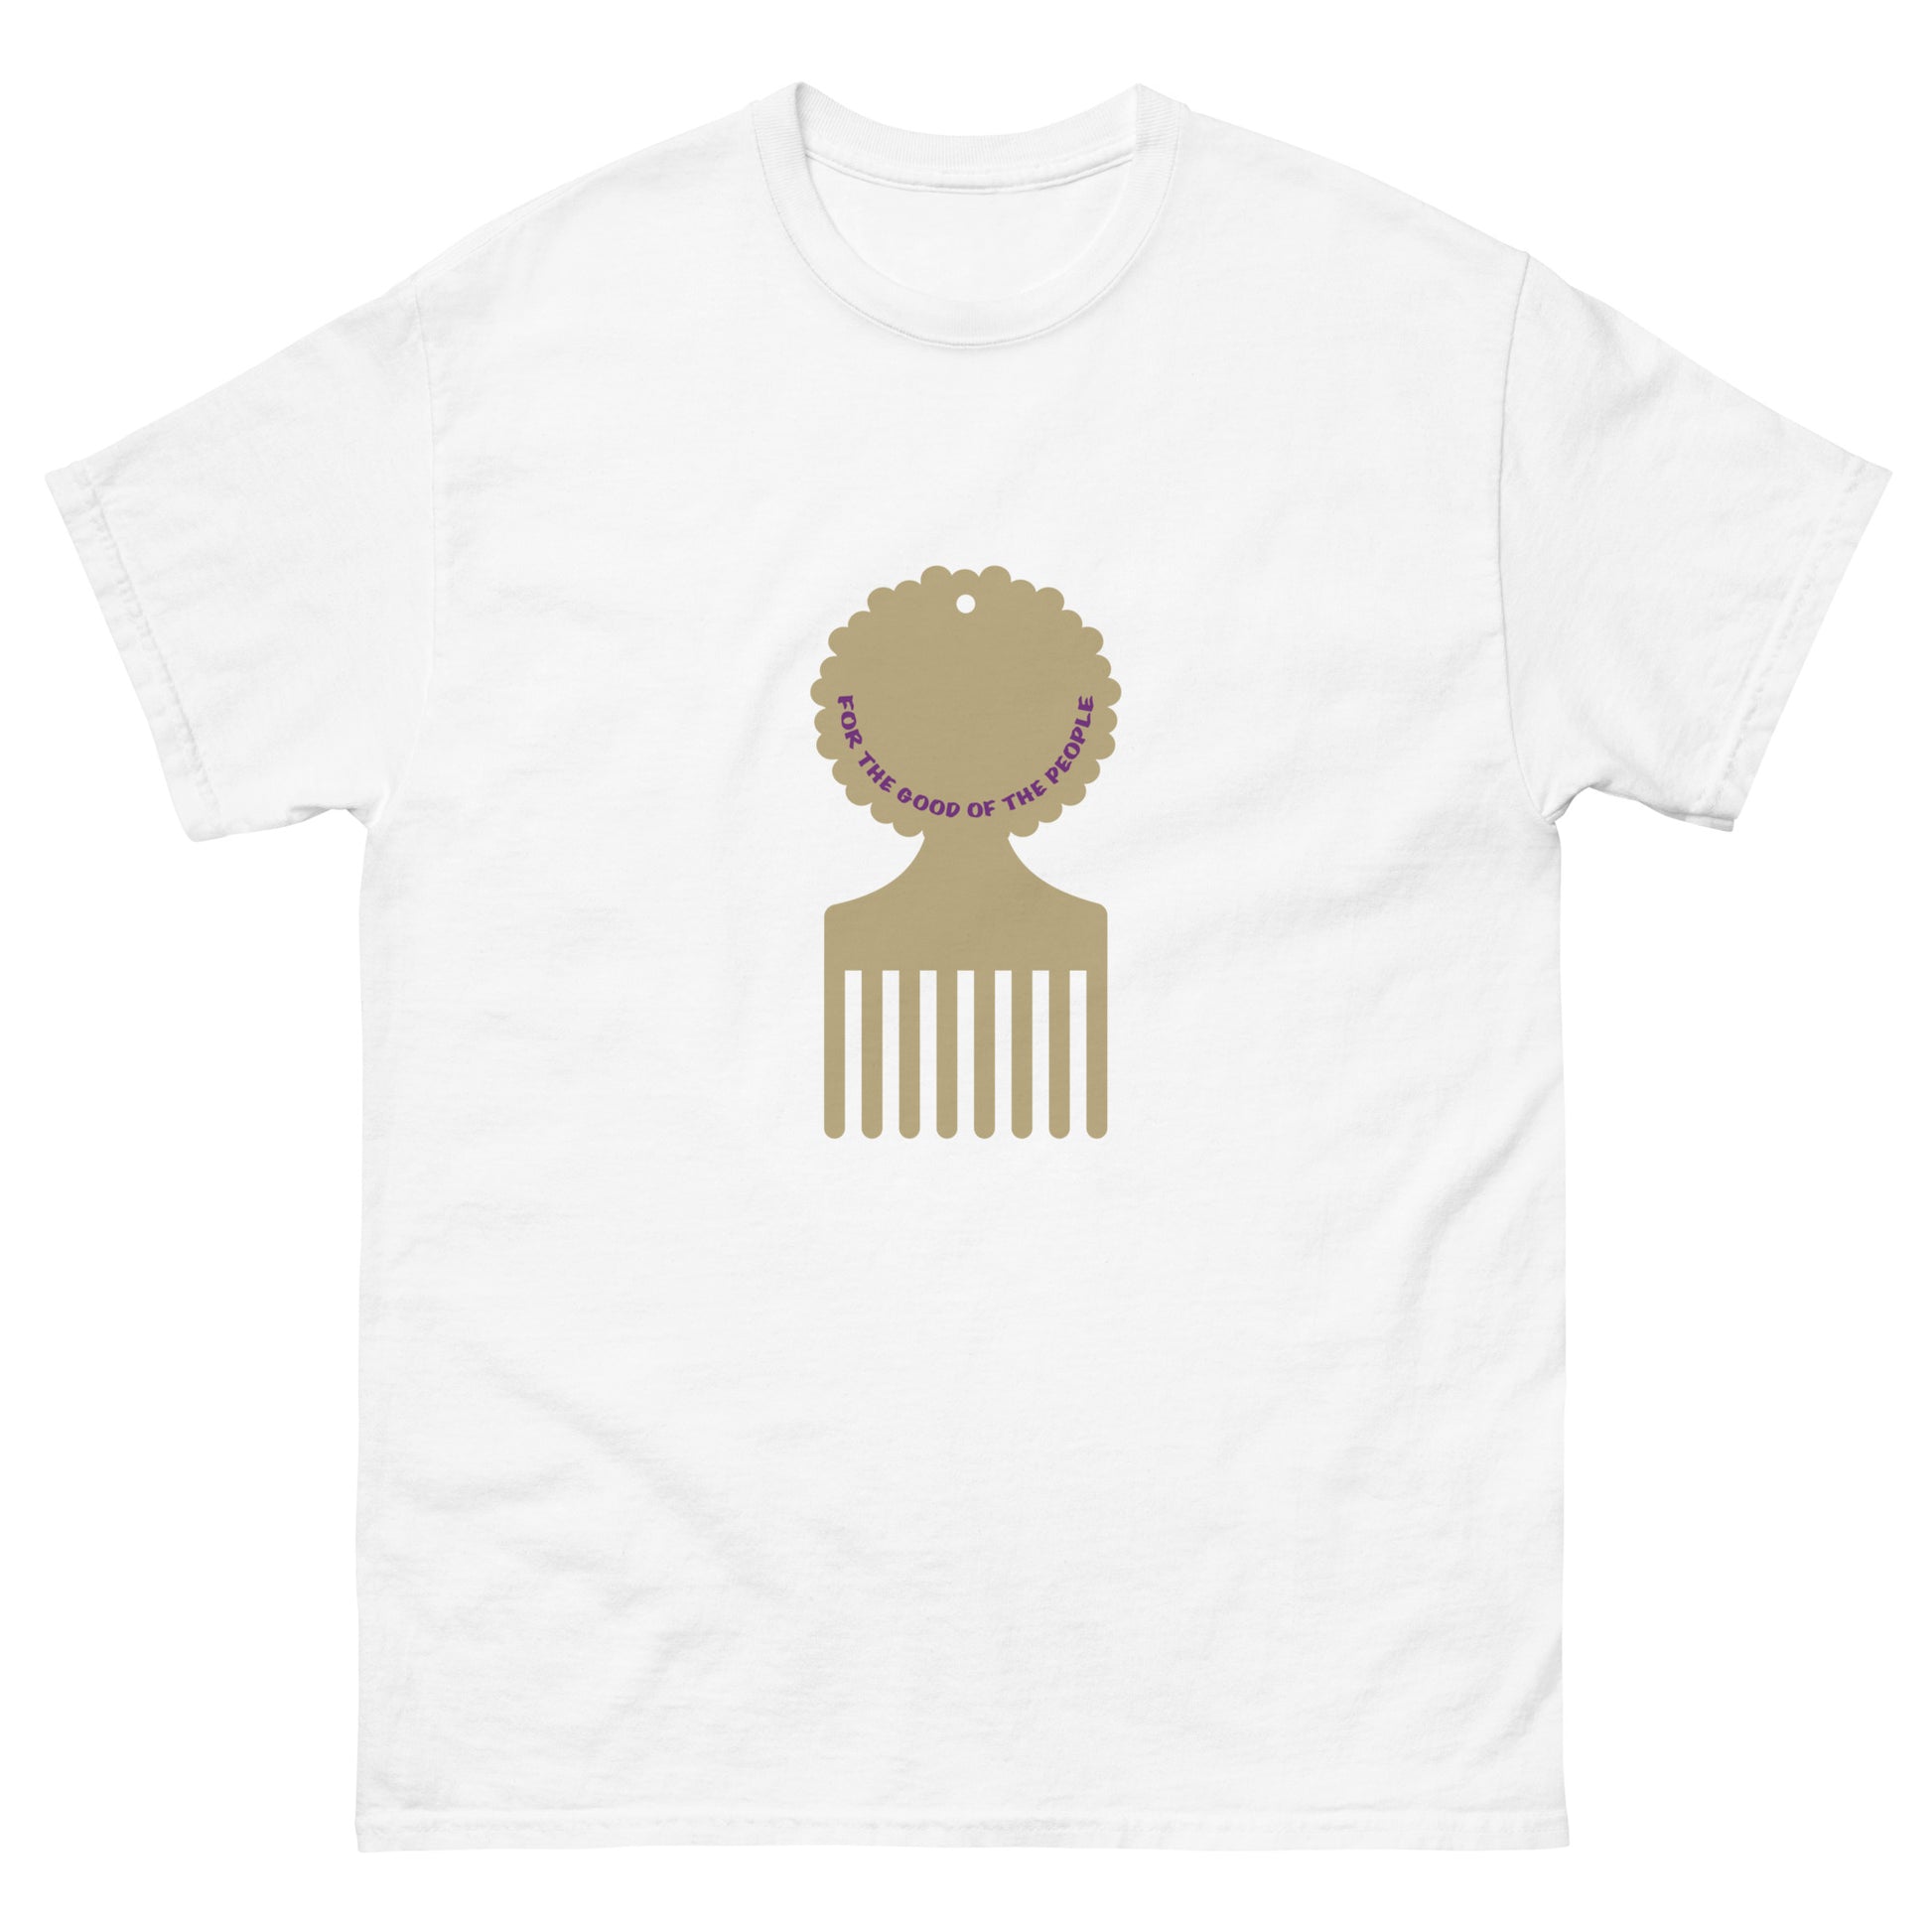 Men's white tee with gold afro pick in the center of shirt, with for the good of the people in purple inside the afro pick's handle.